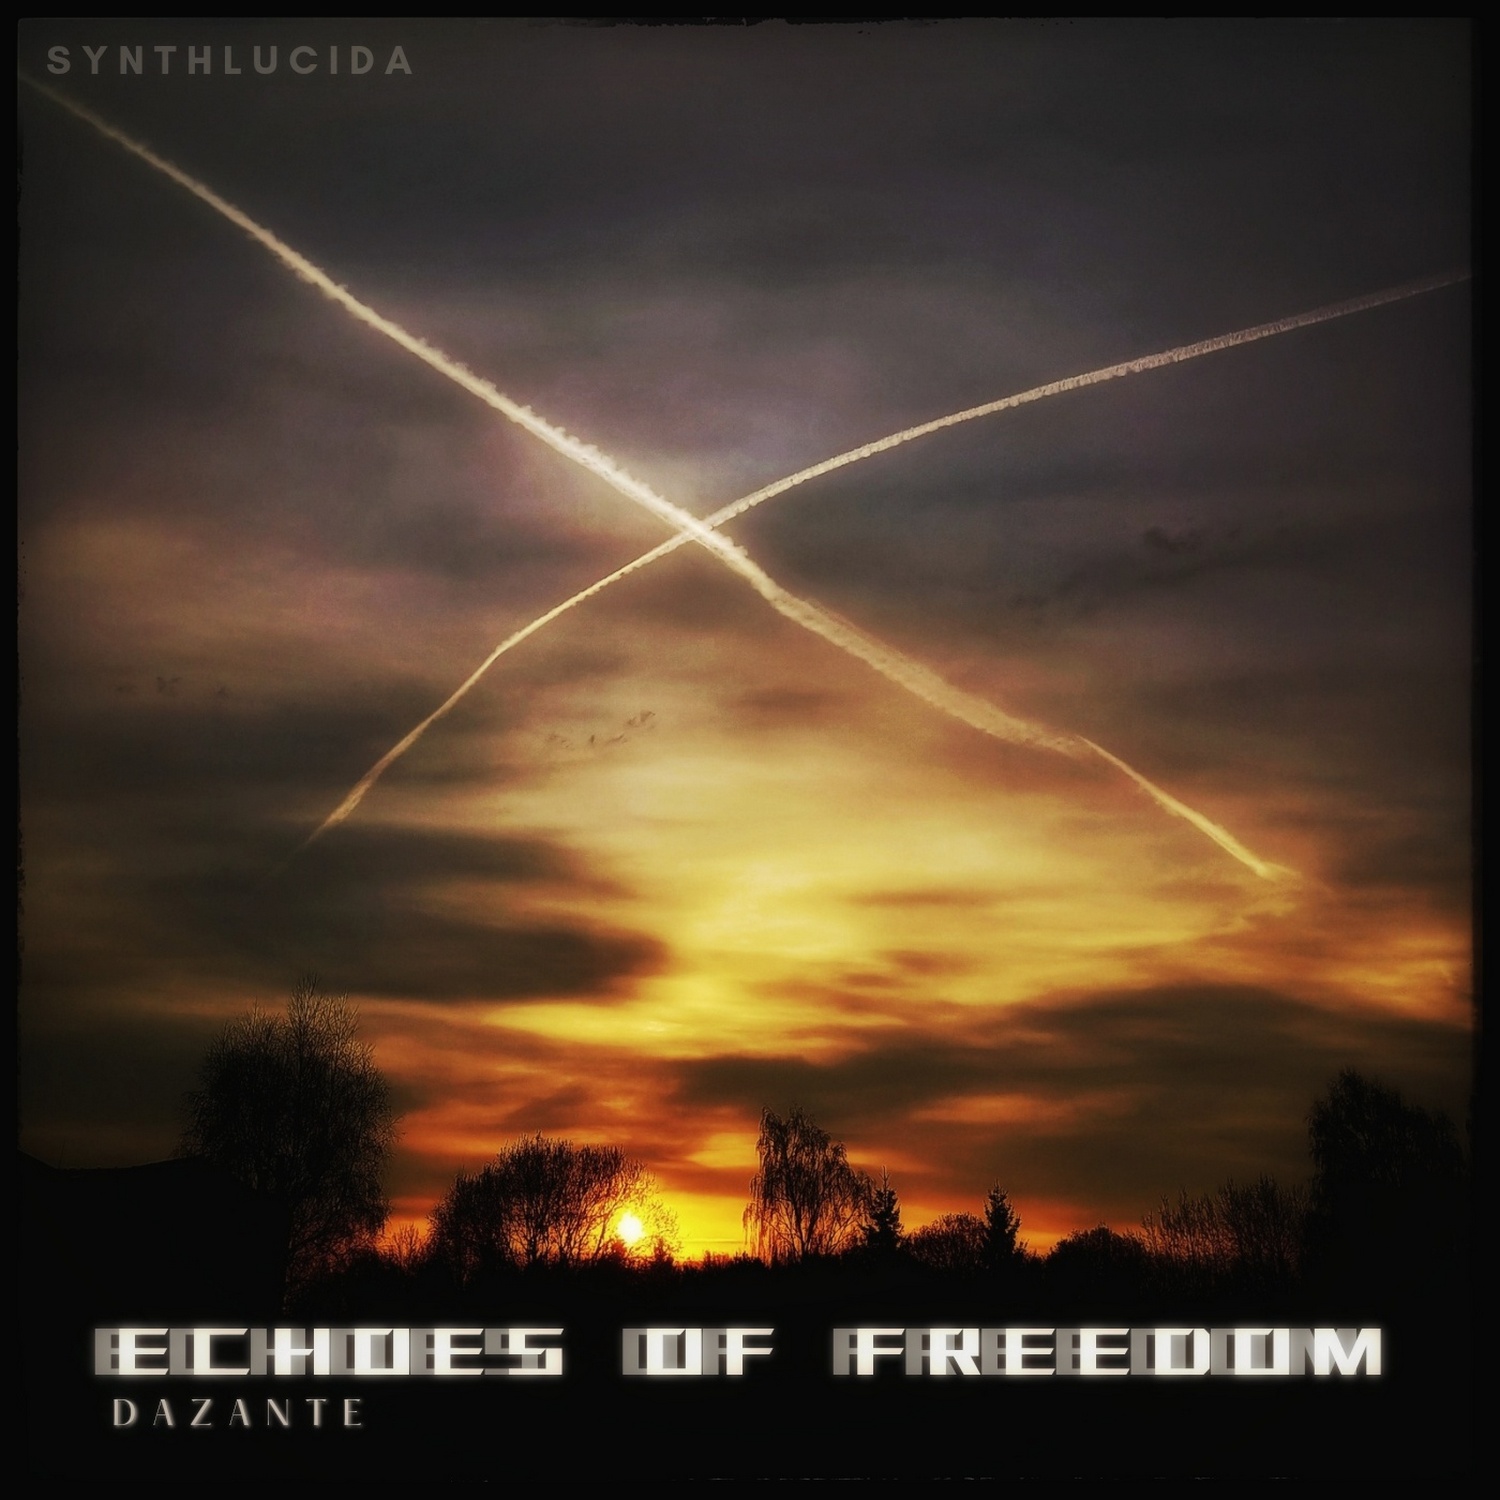 Echoes of freedom for relaxing and summer deep party.